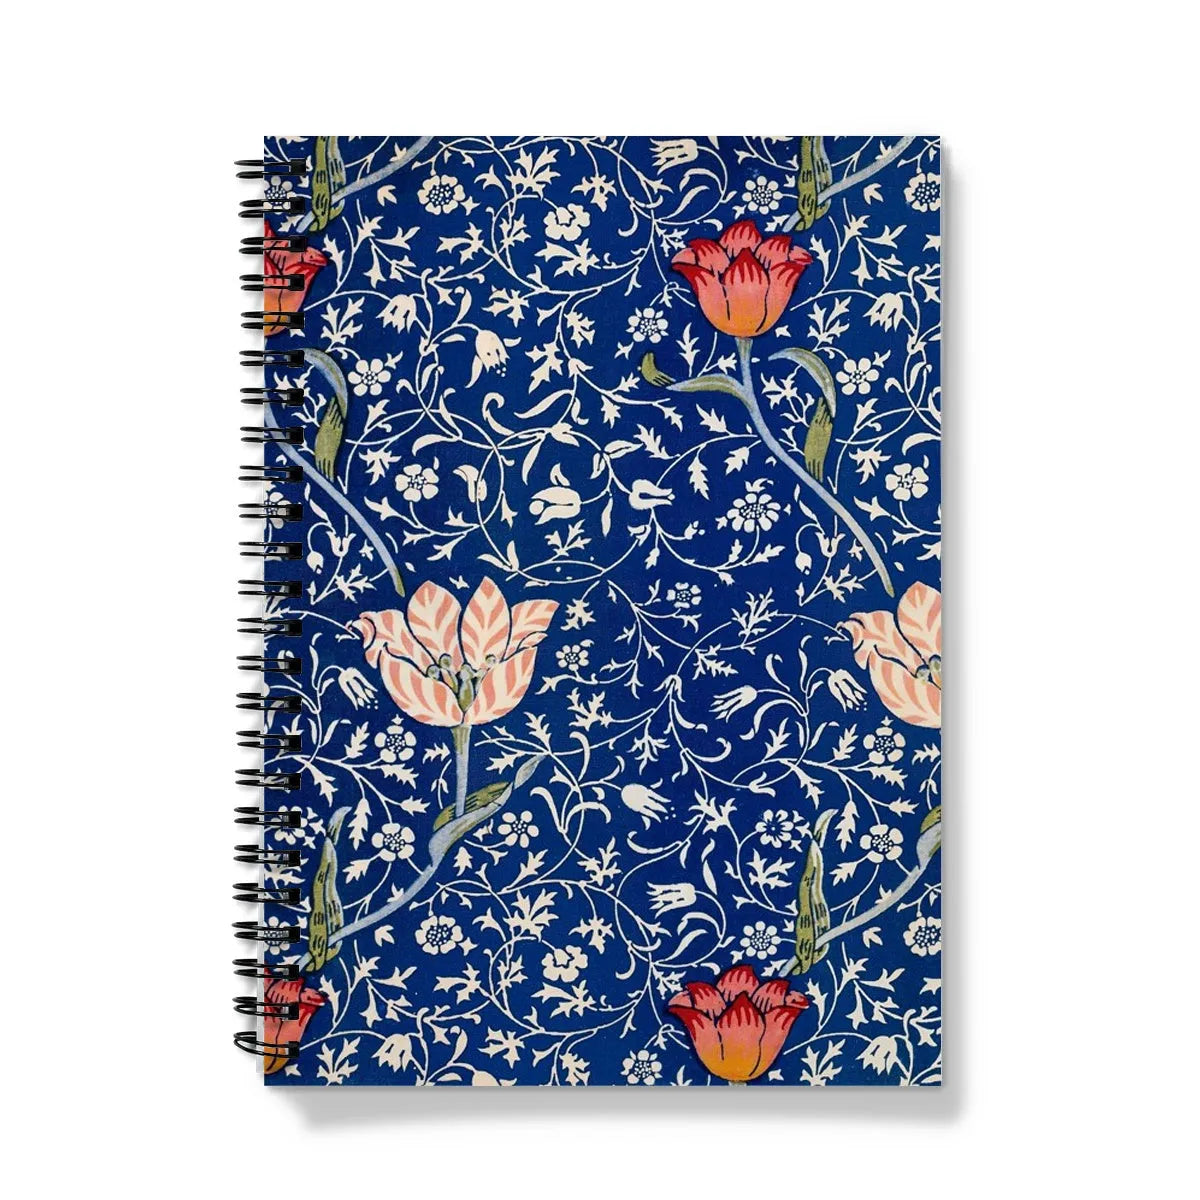 Medway - William Morris & Co Victorian Era Floral Notebook - A5 - Graph Paper - Notebooks & Notepads - Aesthetic Art